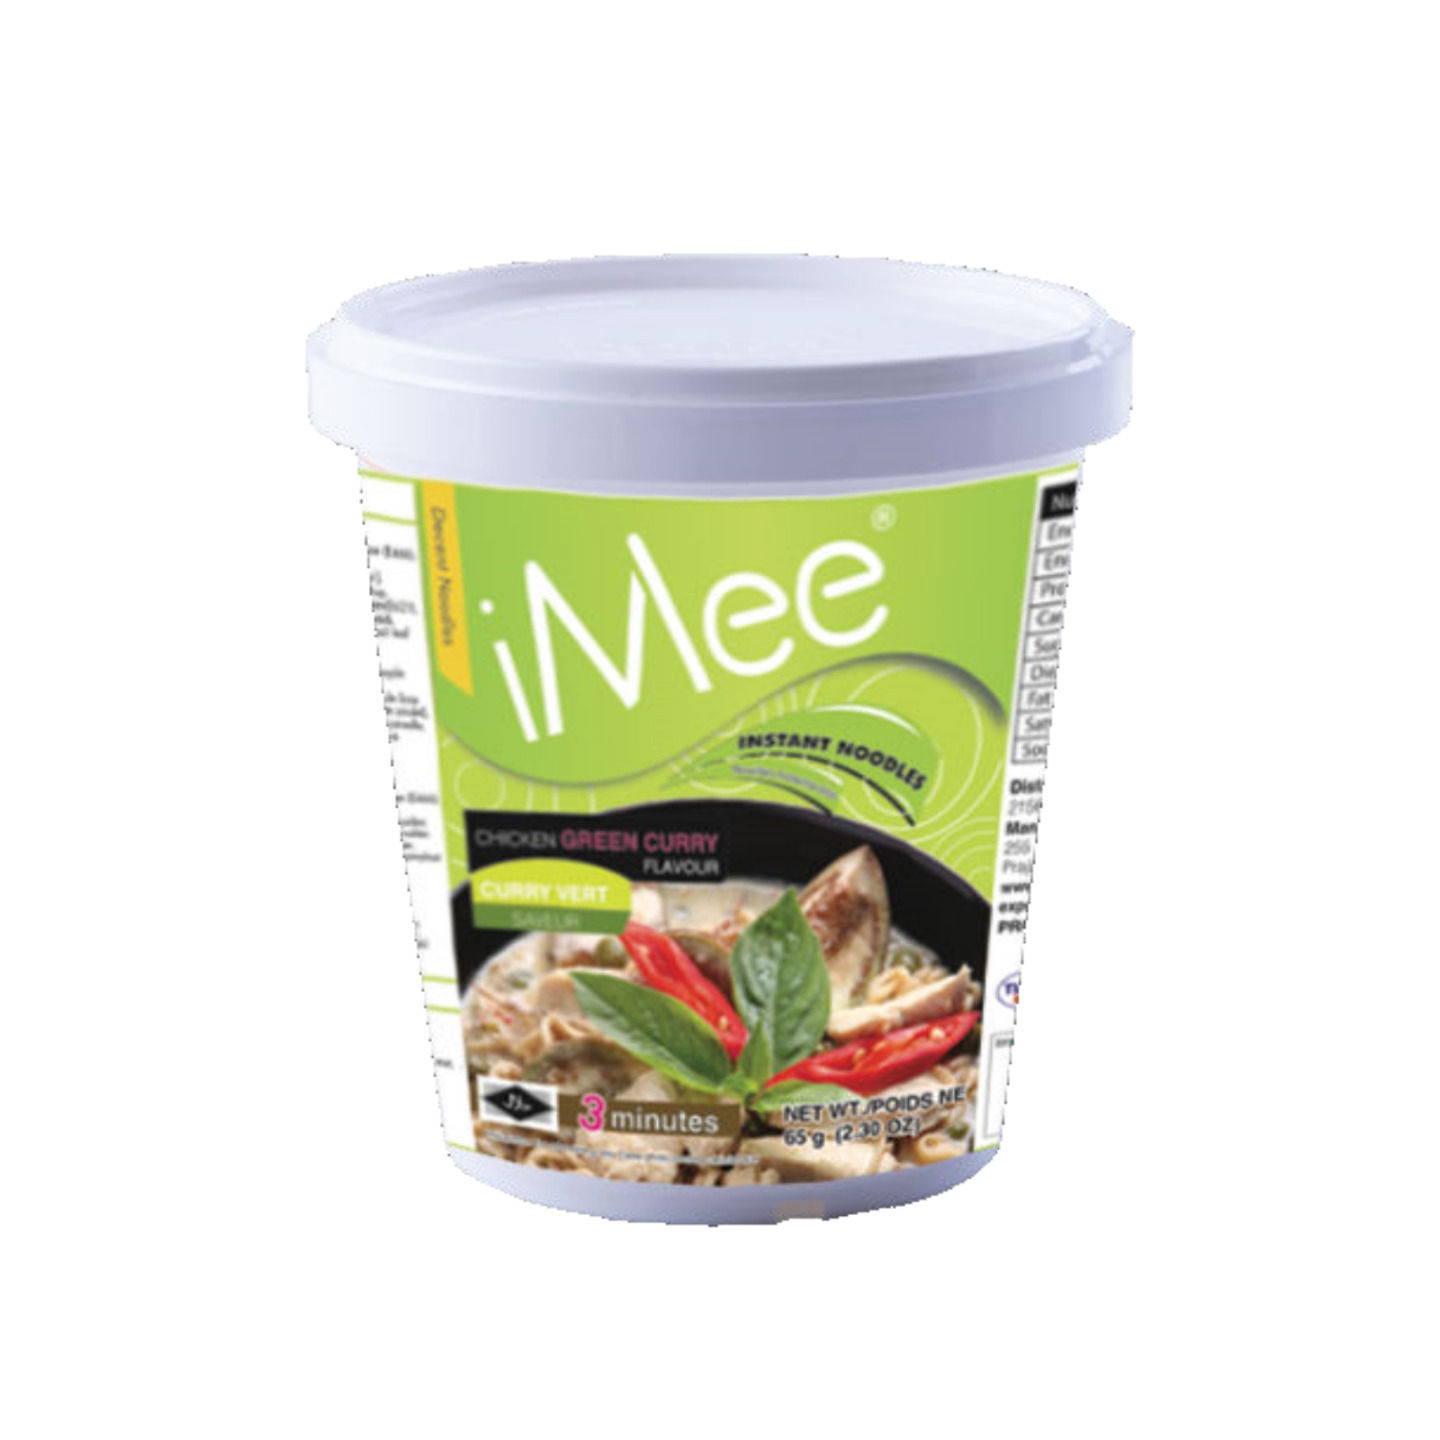 Imee Instant Cup Noodles Chiciken Green Curry Flavor 3 X 70 G